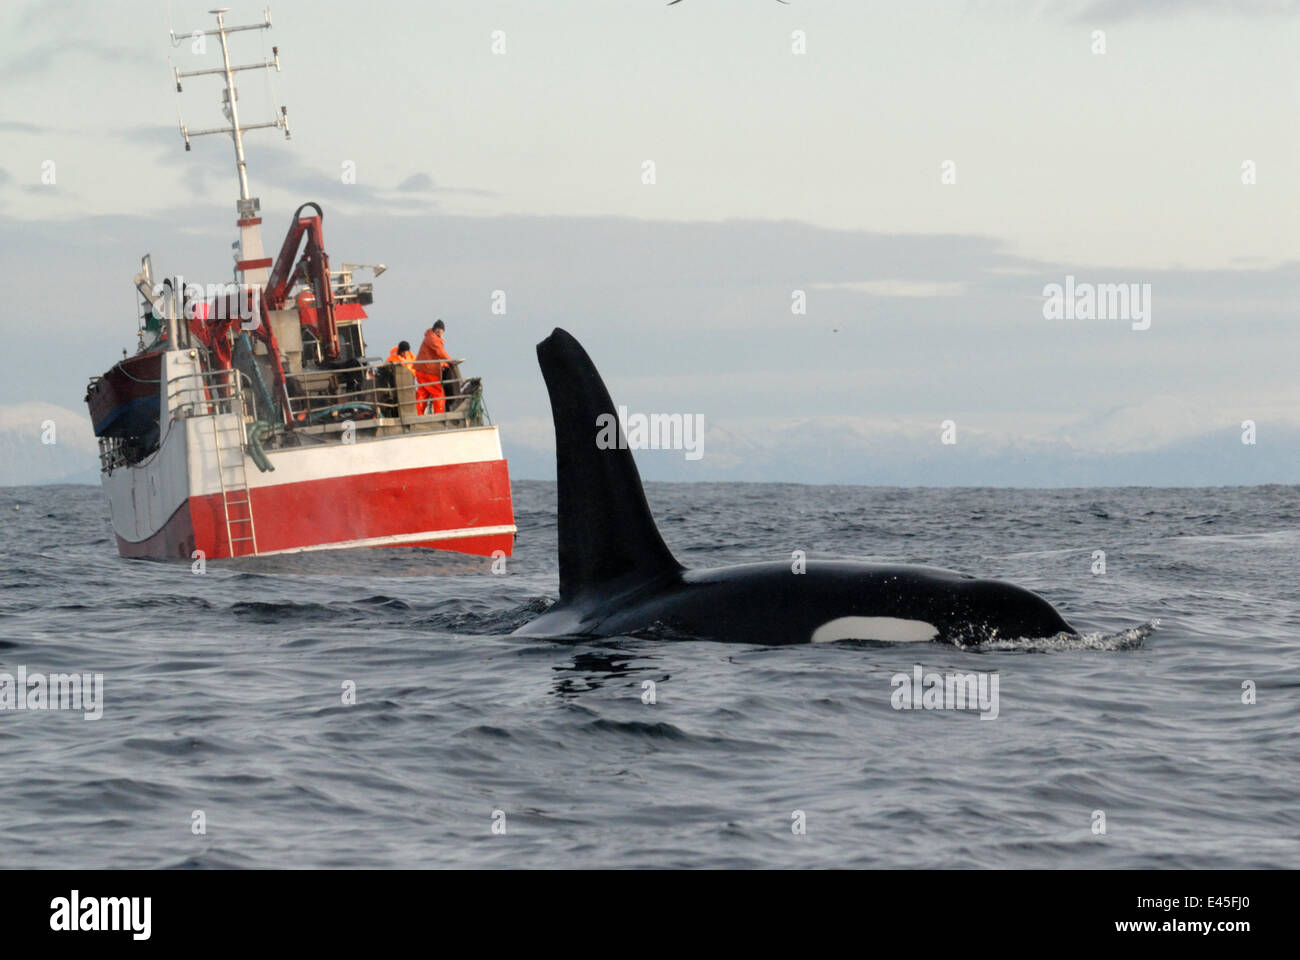 Killer whale / Orca (Orcinus orca) at surface in front of a herring fishing boat, Kristiansund, Nordmøre, Norway, February 2009 Stock Photo